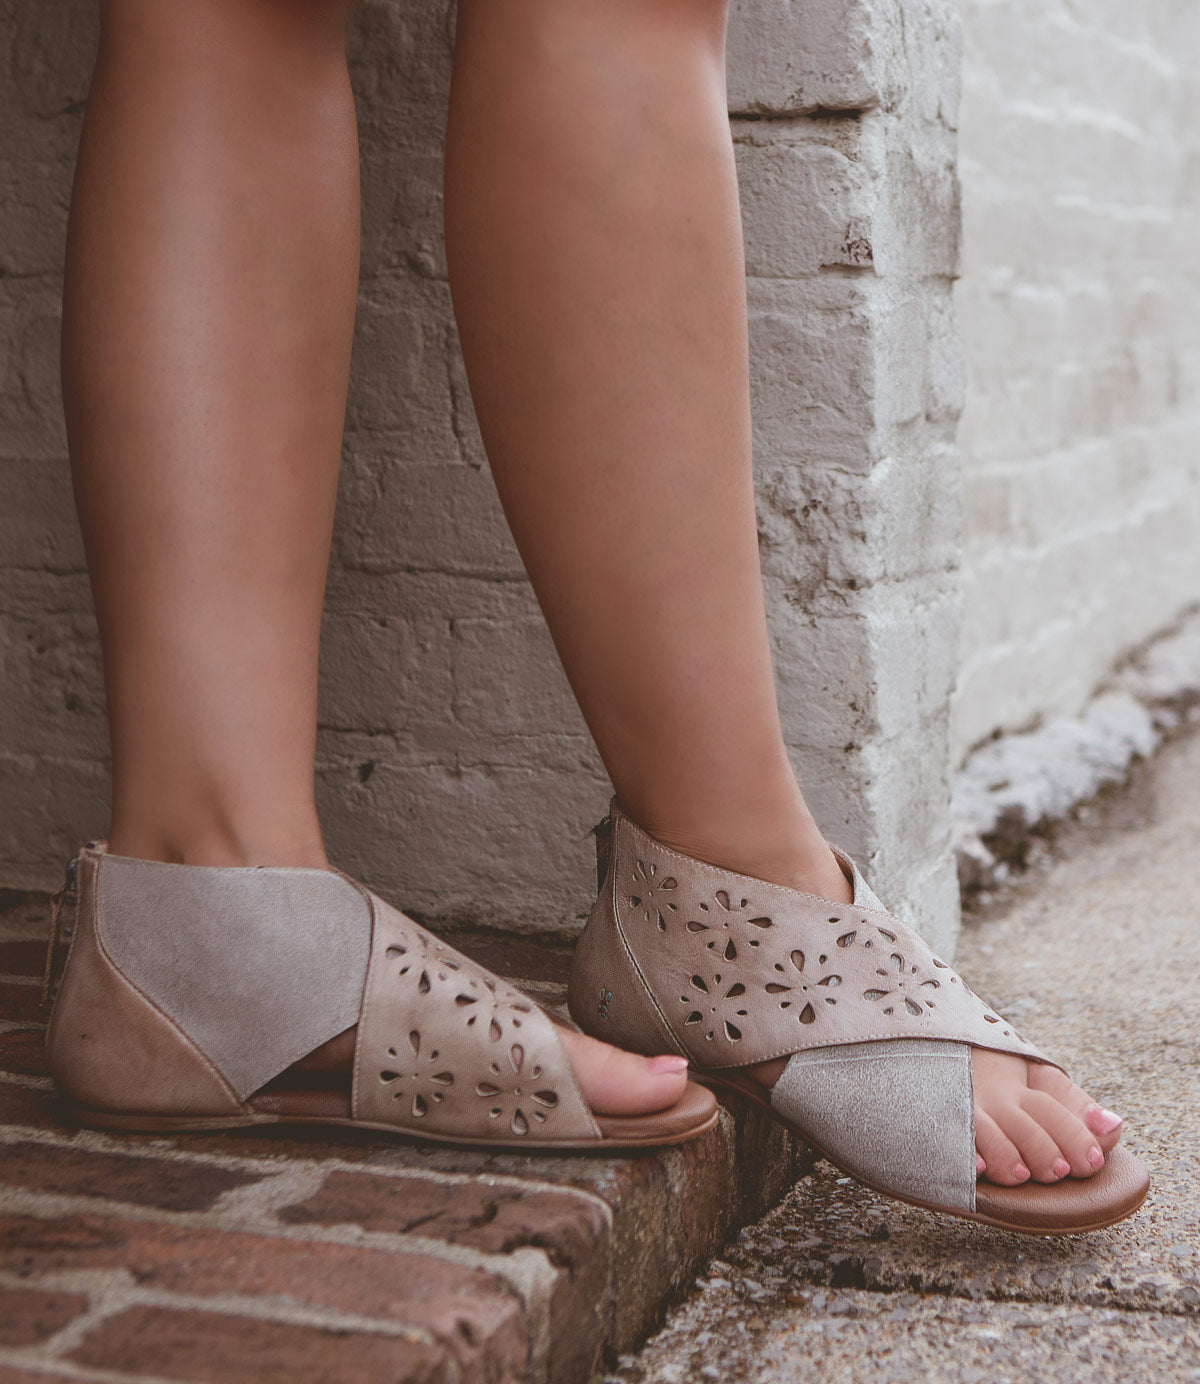 Person wearing Roan Rotation light brown, leather cross-strap sandals with decorative cutouts and a cushioned footbed, standing on a brick step against a white wall.